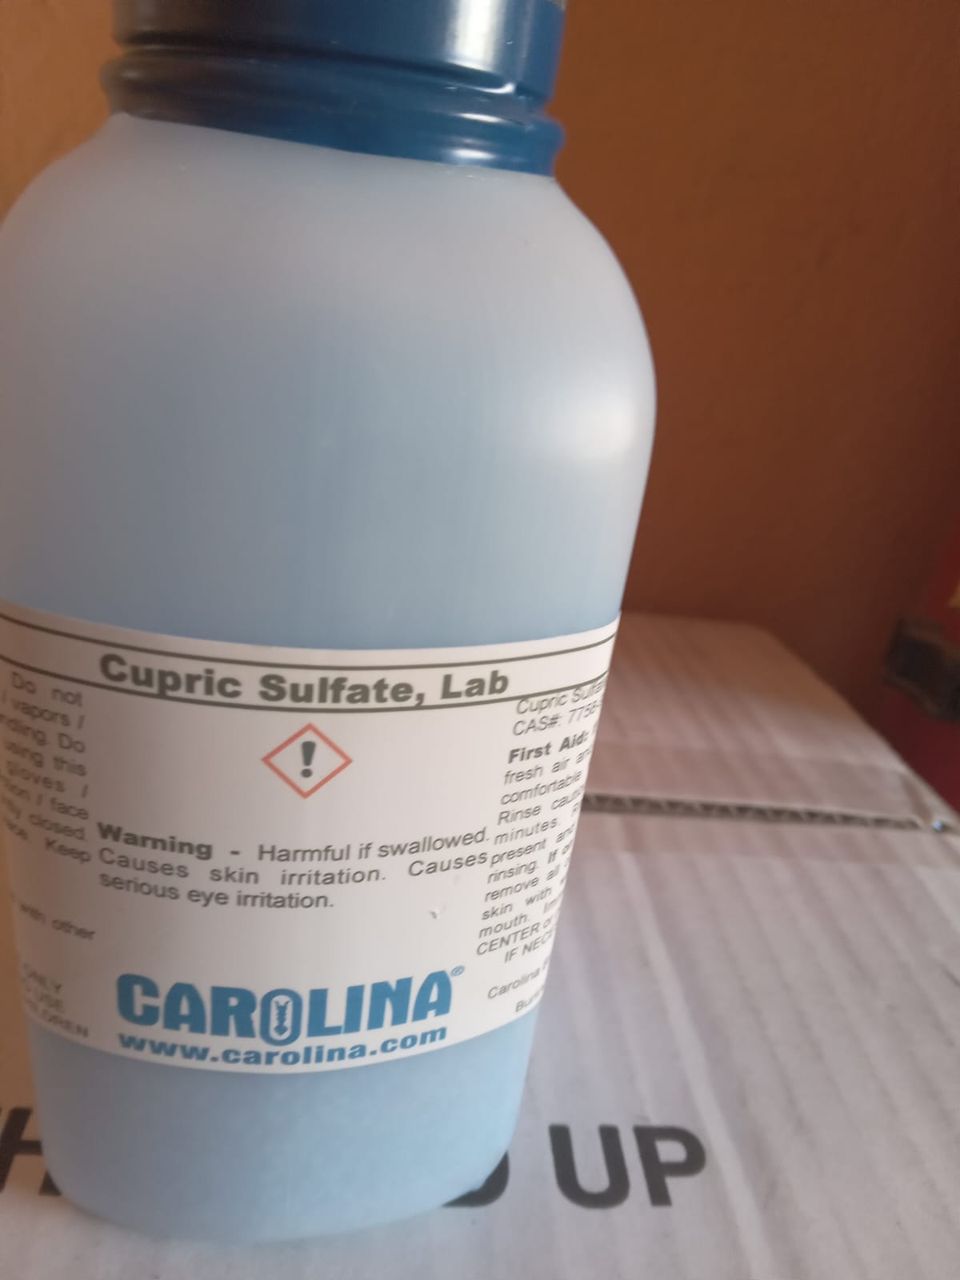 Cupric sulphate